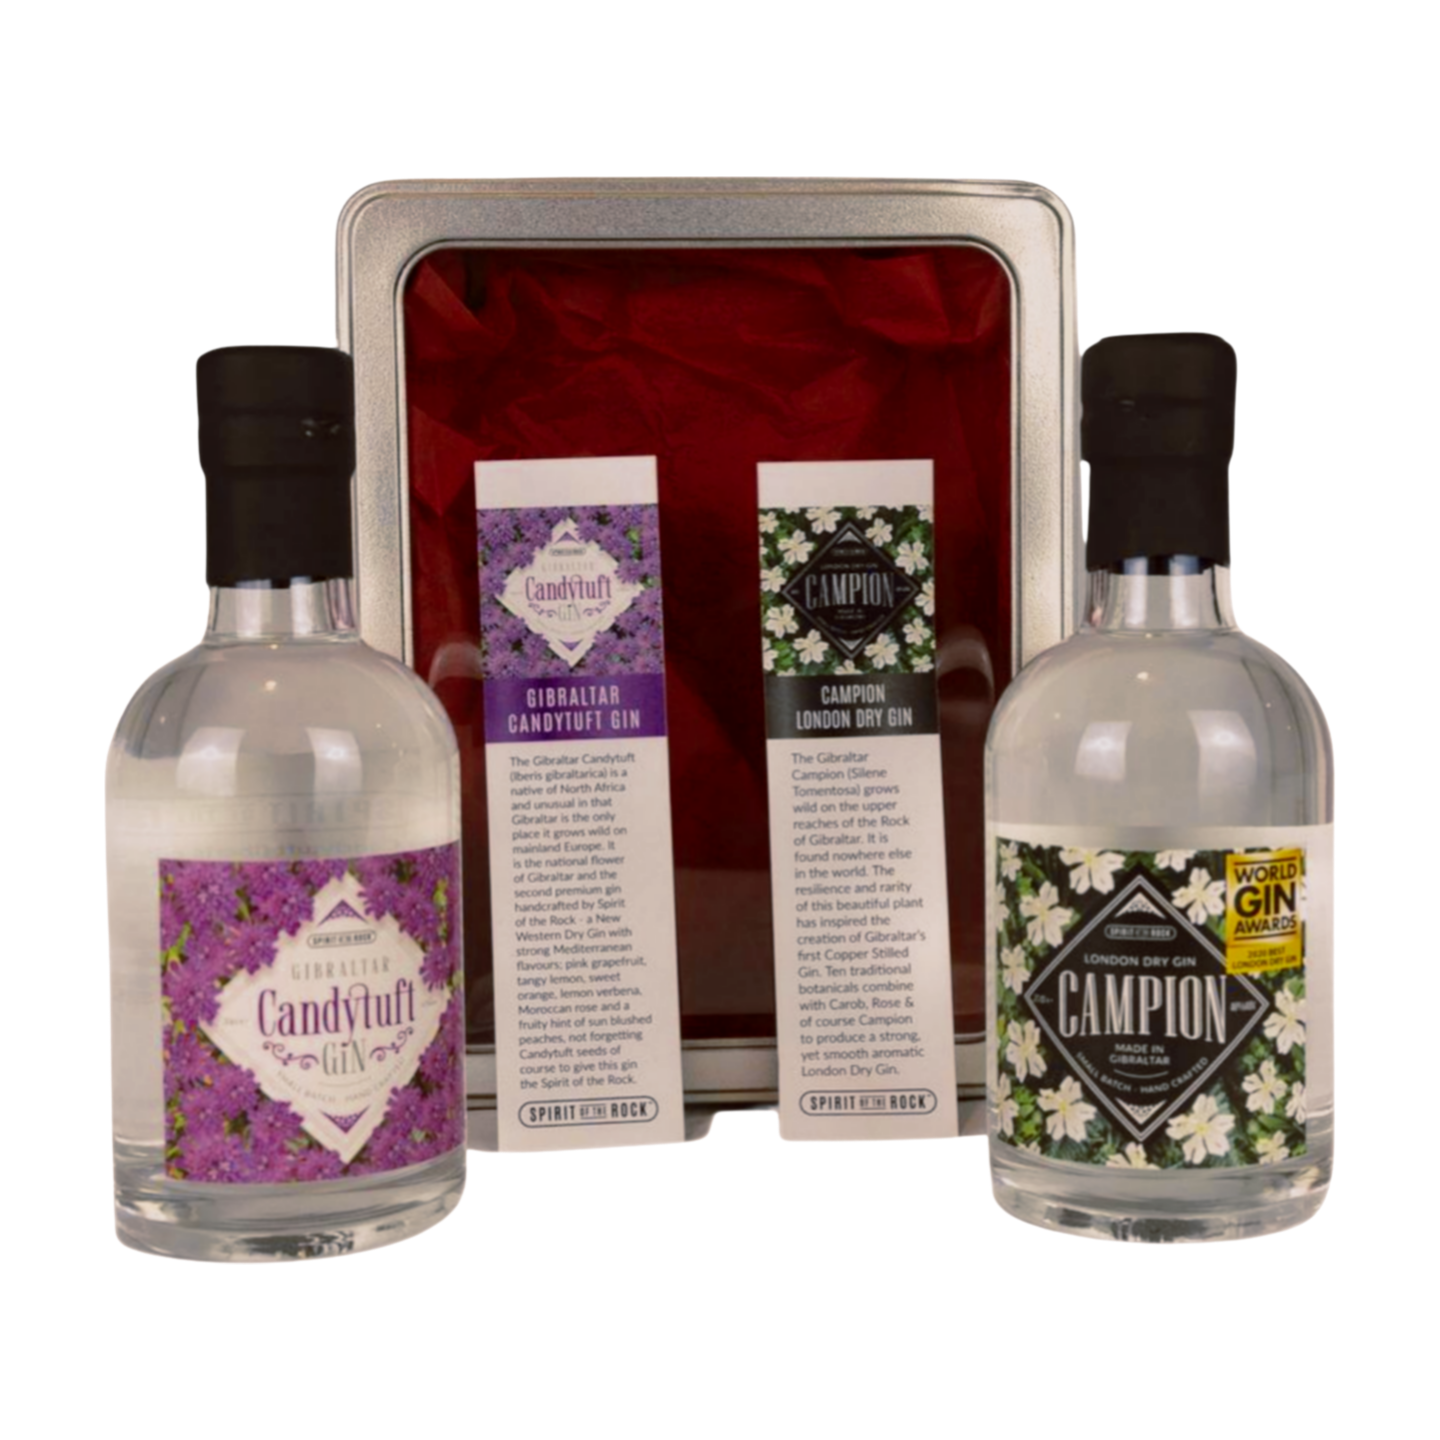 Campion and Candytuft Premium Gin Gift Set